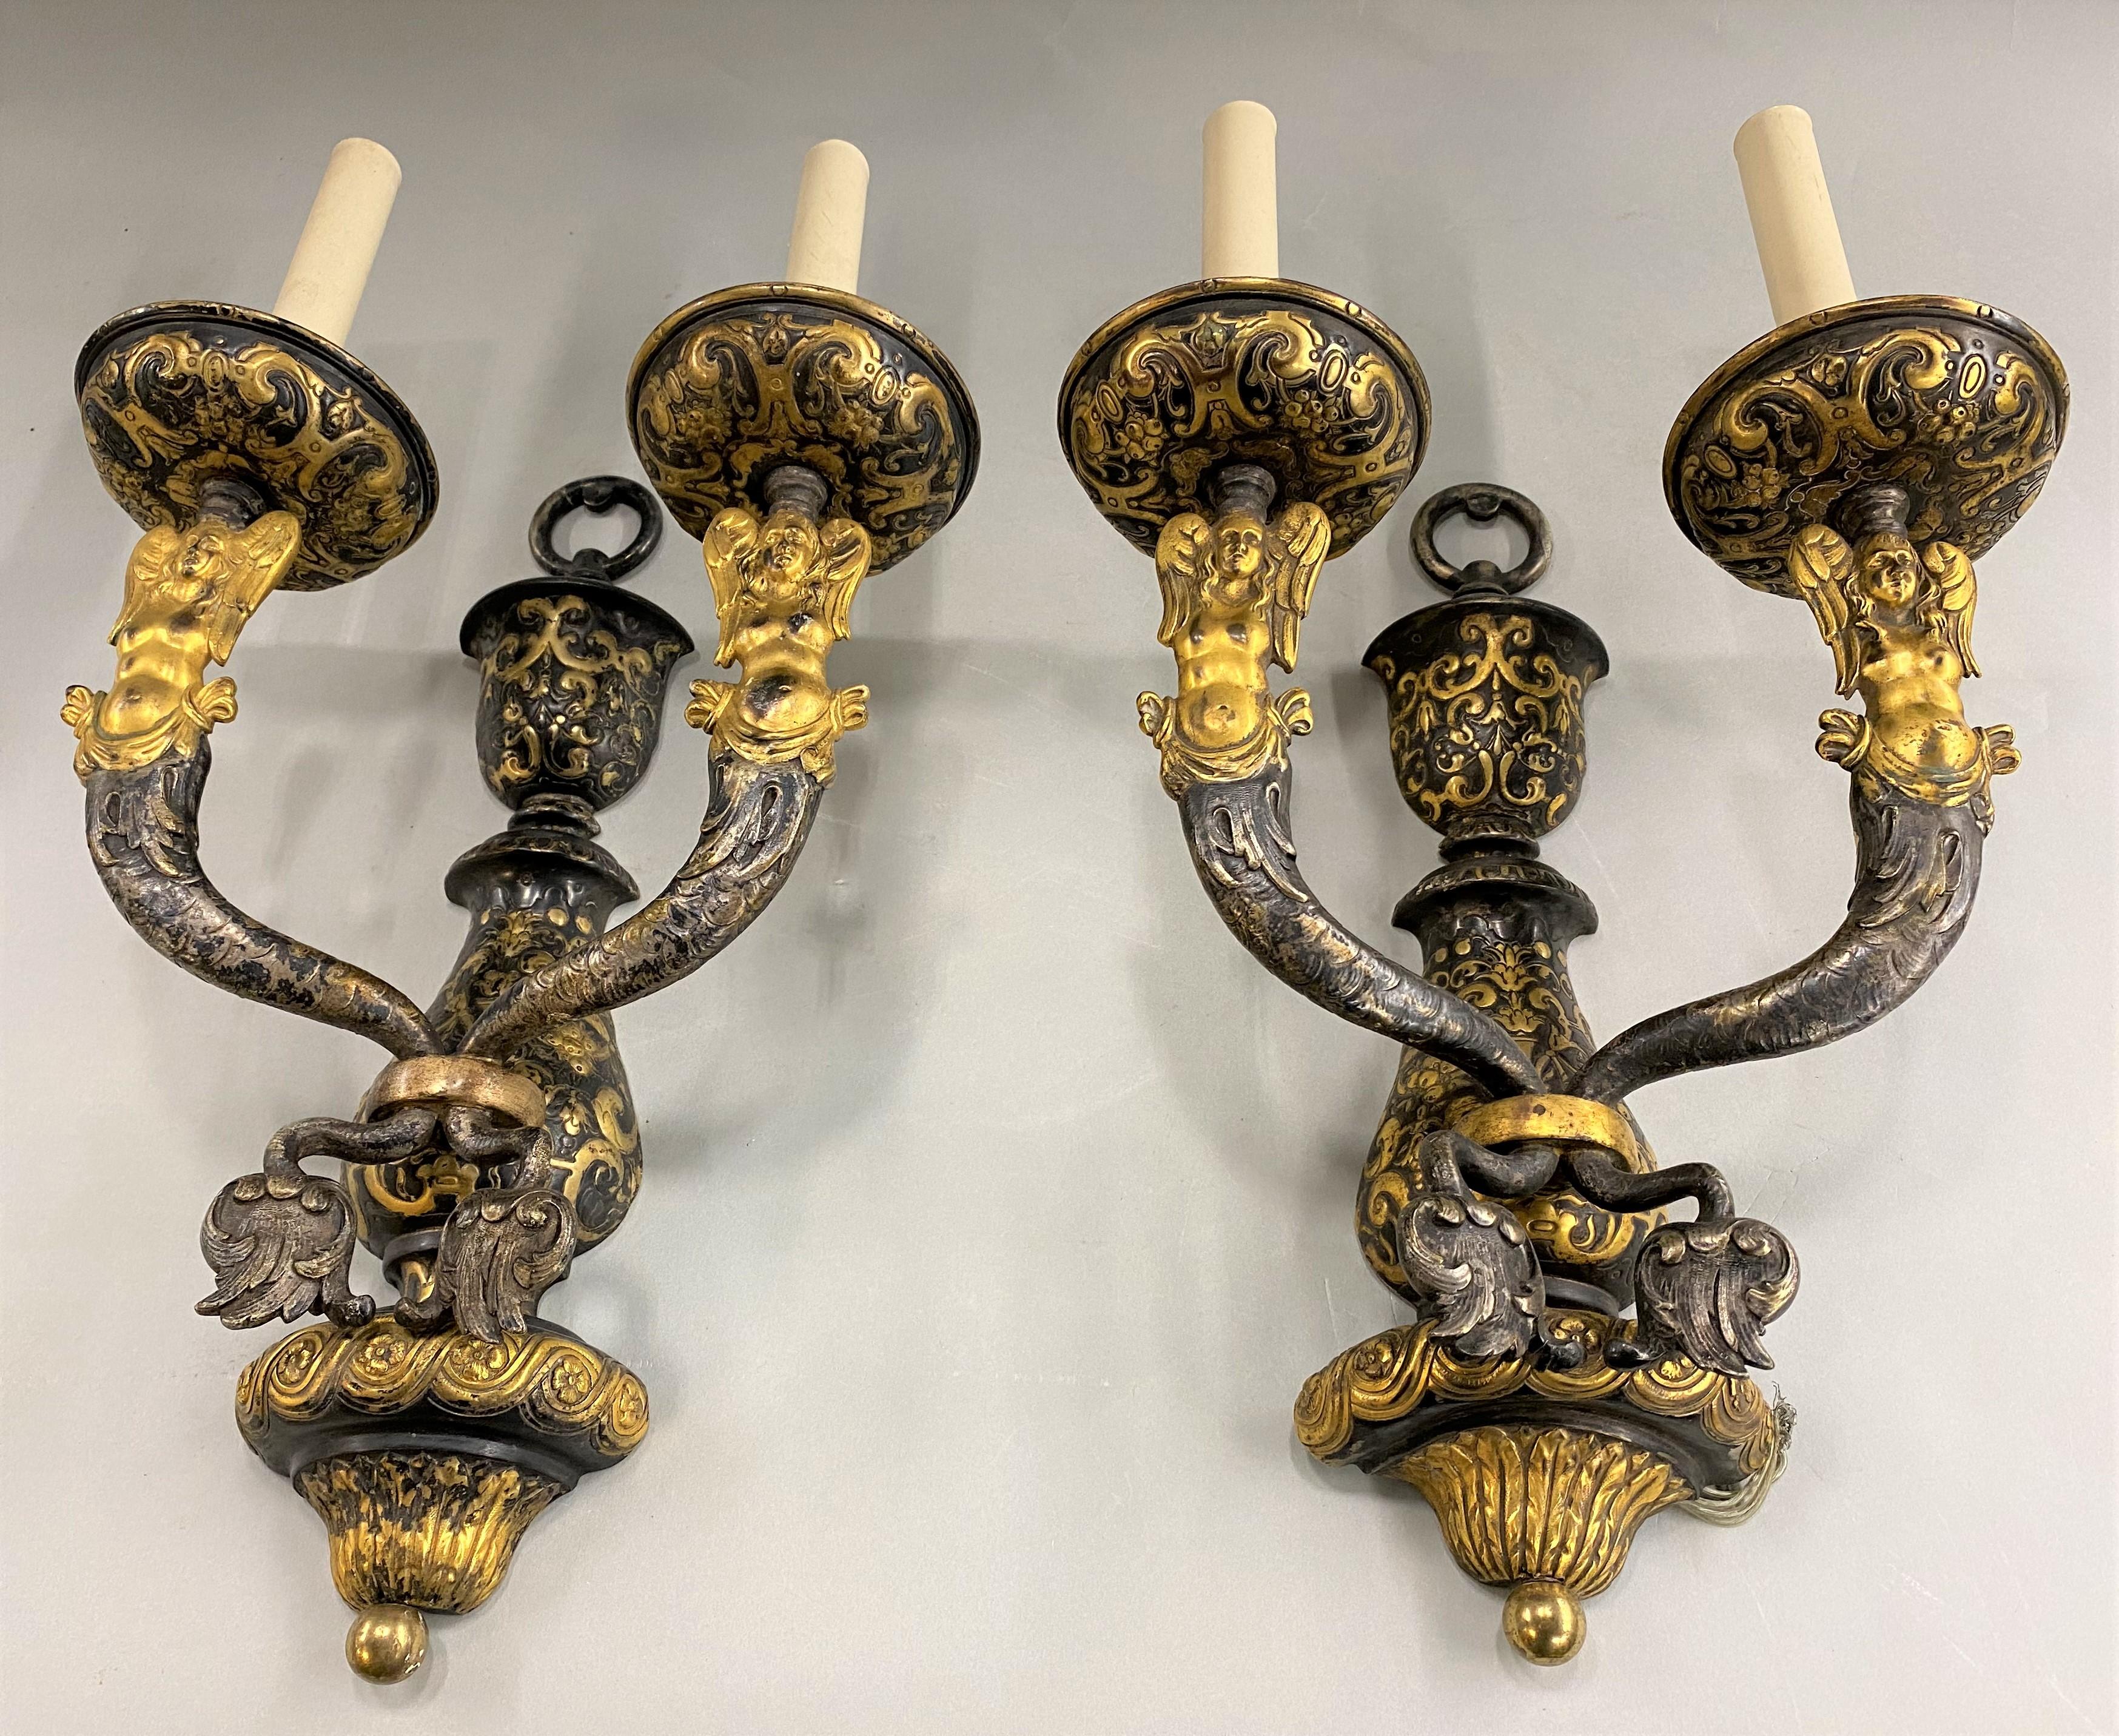 A beautiful pair of E.F. Caldwell two light scroll decorated bronze sconces with gilt figural arms showing angelic figures with mermaid tails, mounted on an urn form backplate. Each is stamped with inventory numbers on the back of the top loops. The